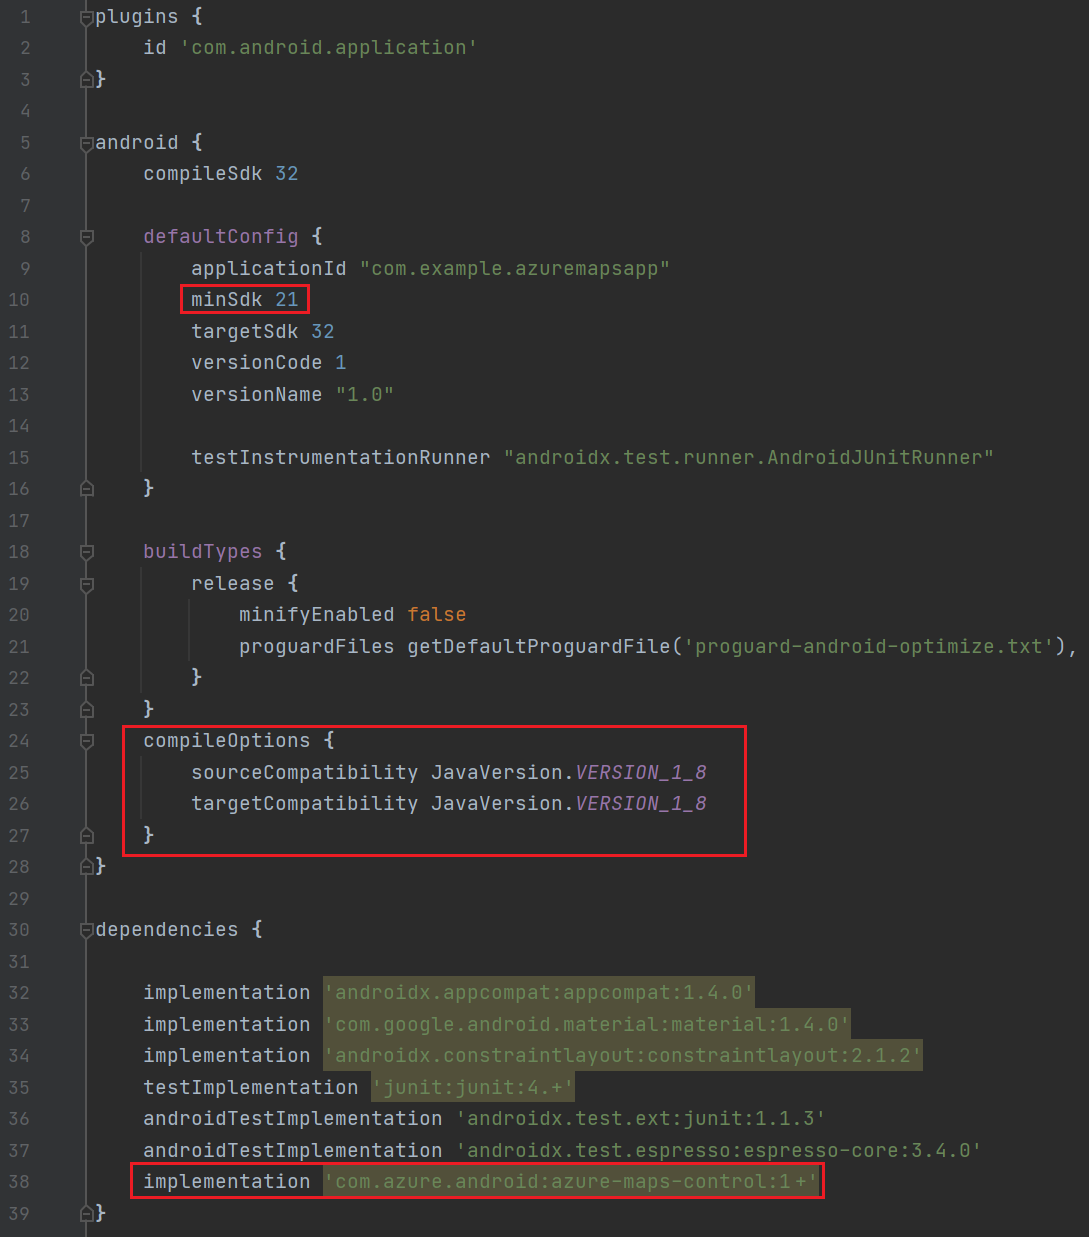 A screenshot showing the application build dot gradle file in Android Studio.